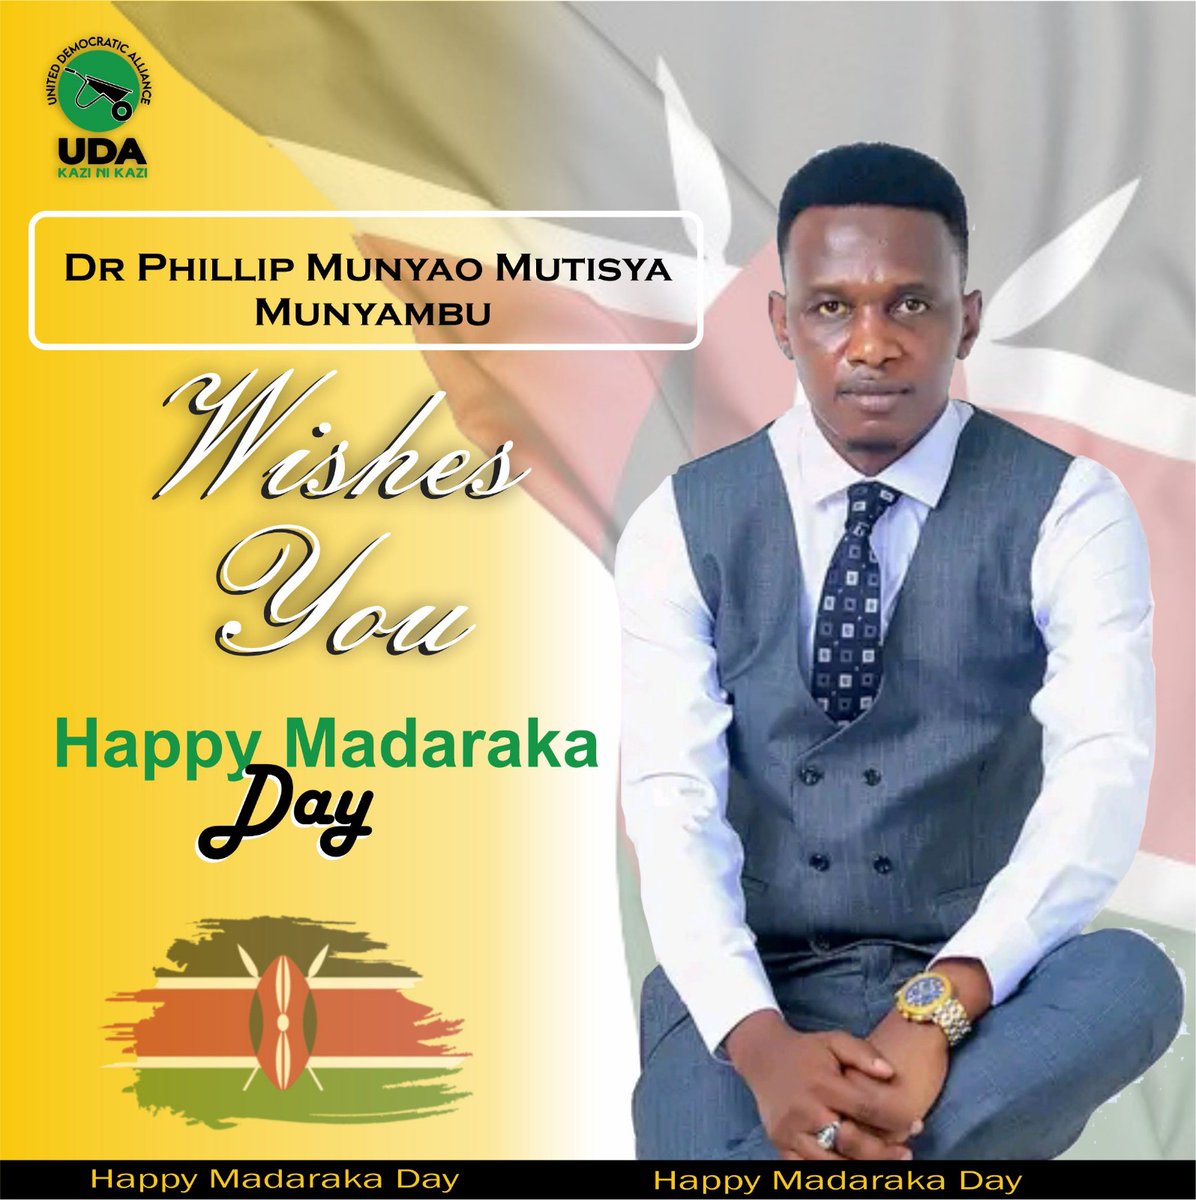 This will always be our country, our nation, our land, the territory that is our home and well charity begins at home as we honour those who gave their whole for this country. 

I take this opportunity to wish all Kenyans a #HappyMadarakaDay centered around Micro, Small and…